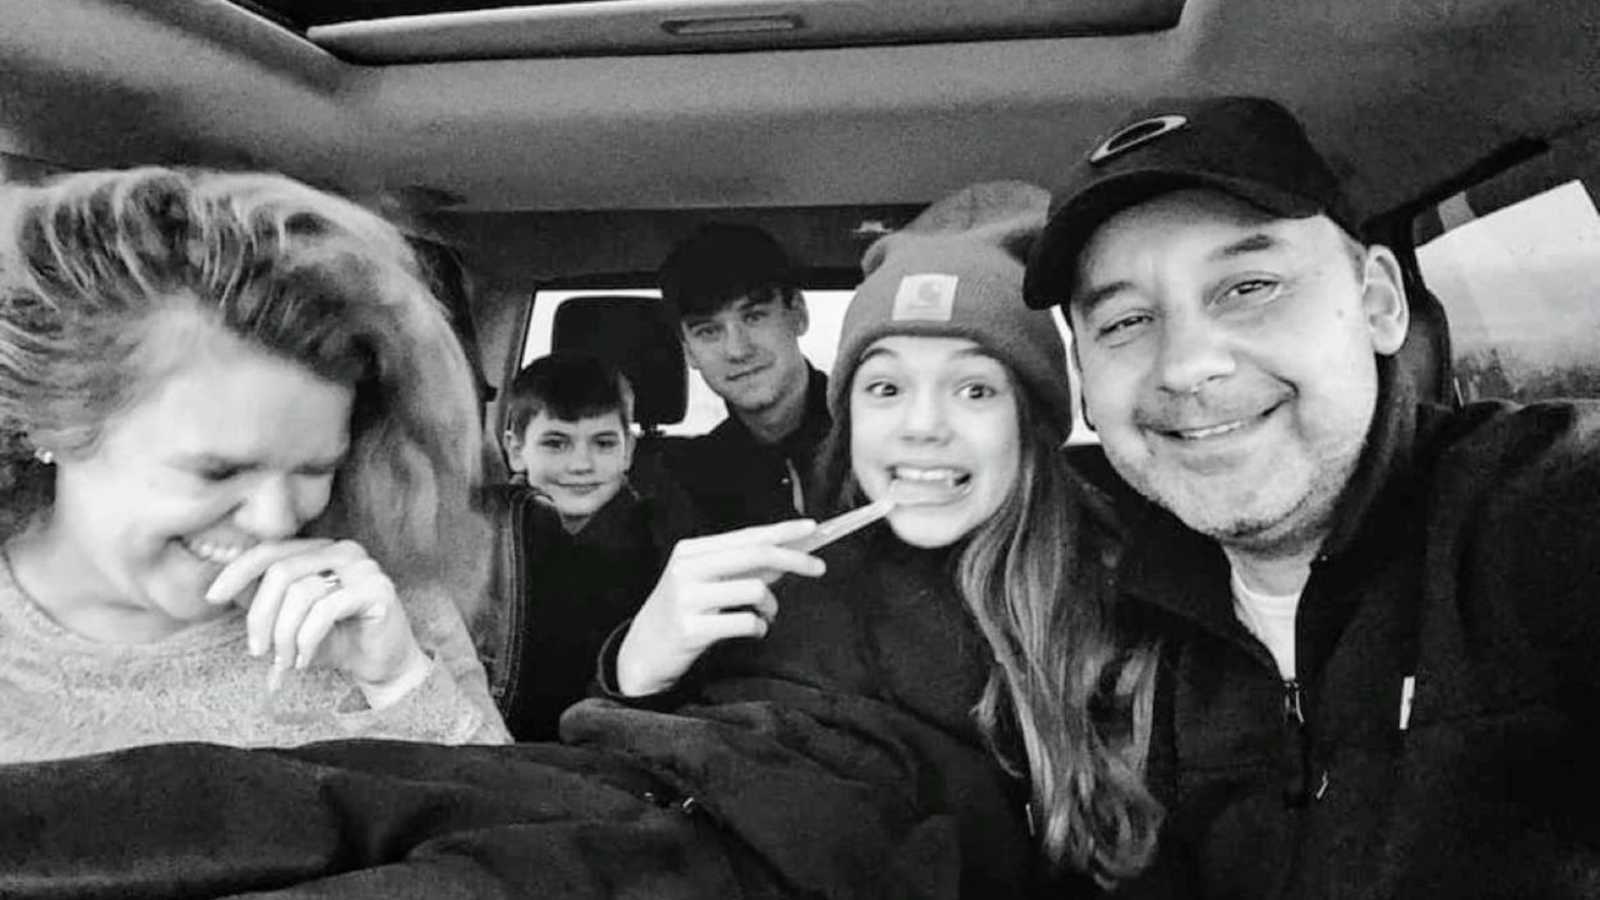 parents take a car selfie with their three teenage children in the backseat